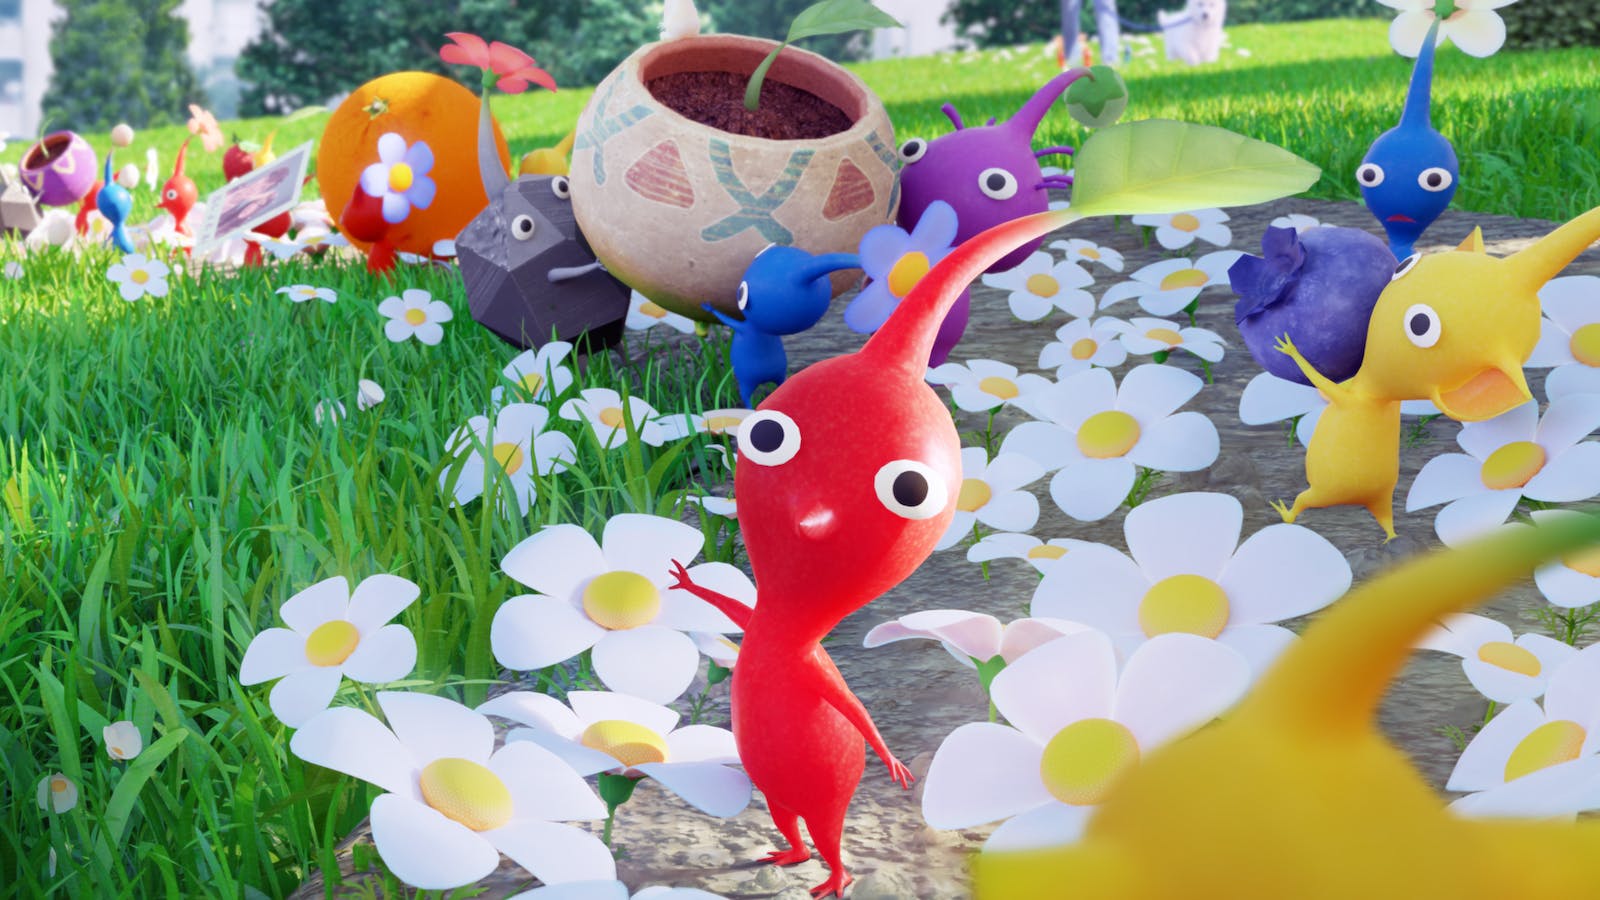 Pikmin creatures, the stars of the new game from the makers of Pokemon Go. Credit: Niantic/Nintendo